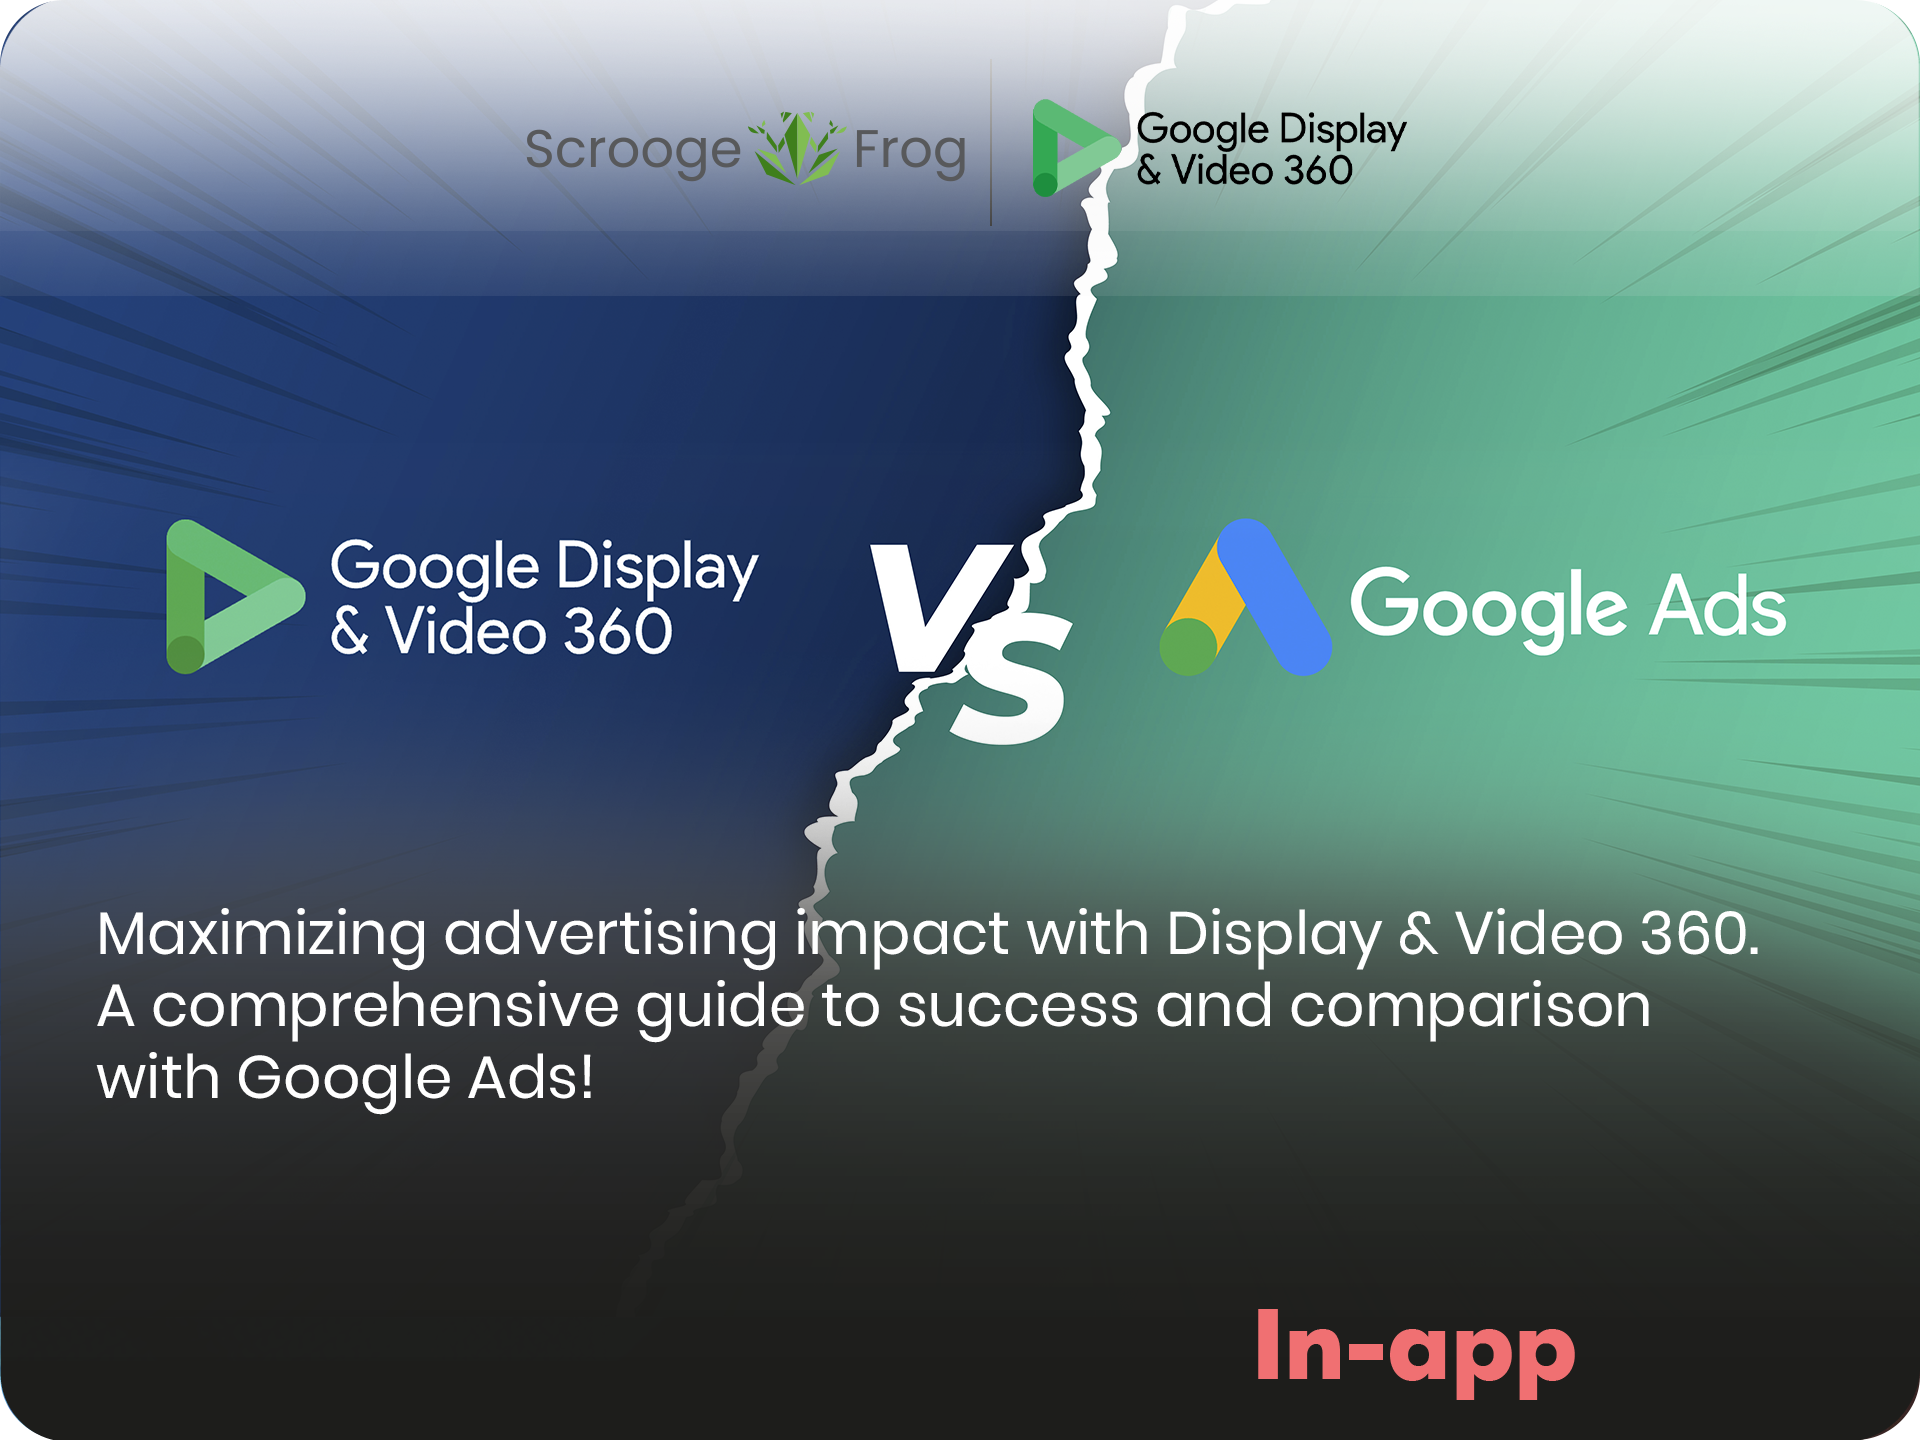 Maximizing advertising impact with Display & Video 360. A comprehensive guide to success and comparison with Google Ads!